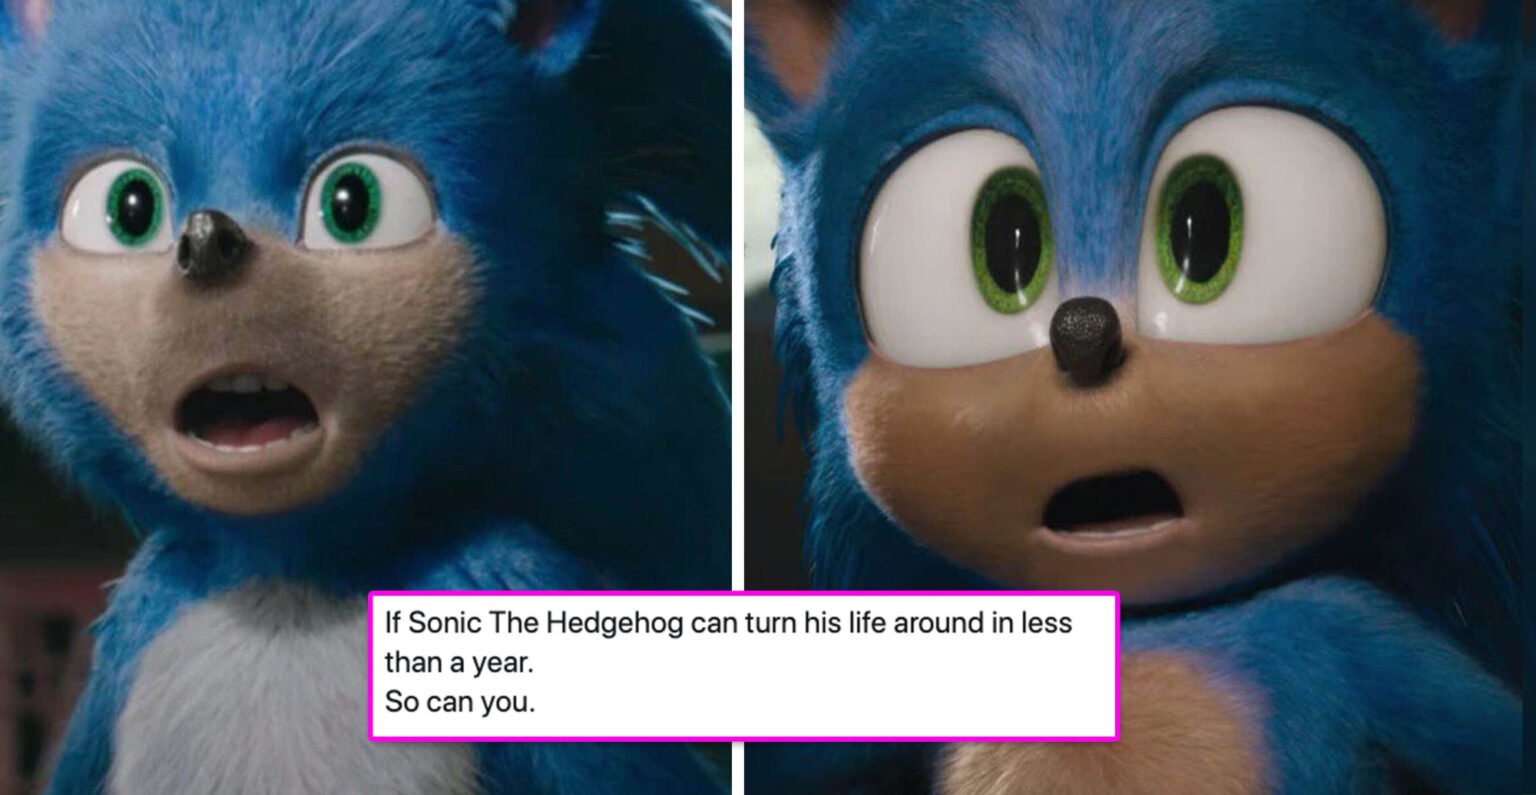 Are you sick of Sonic memes yet? Neither are we! That's why we rushed to bring you some more great memes featuring the "fastest thing alive".